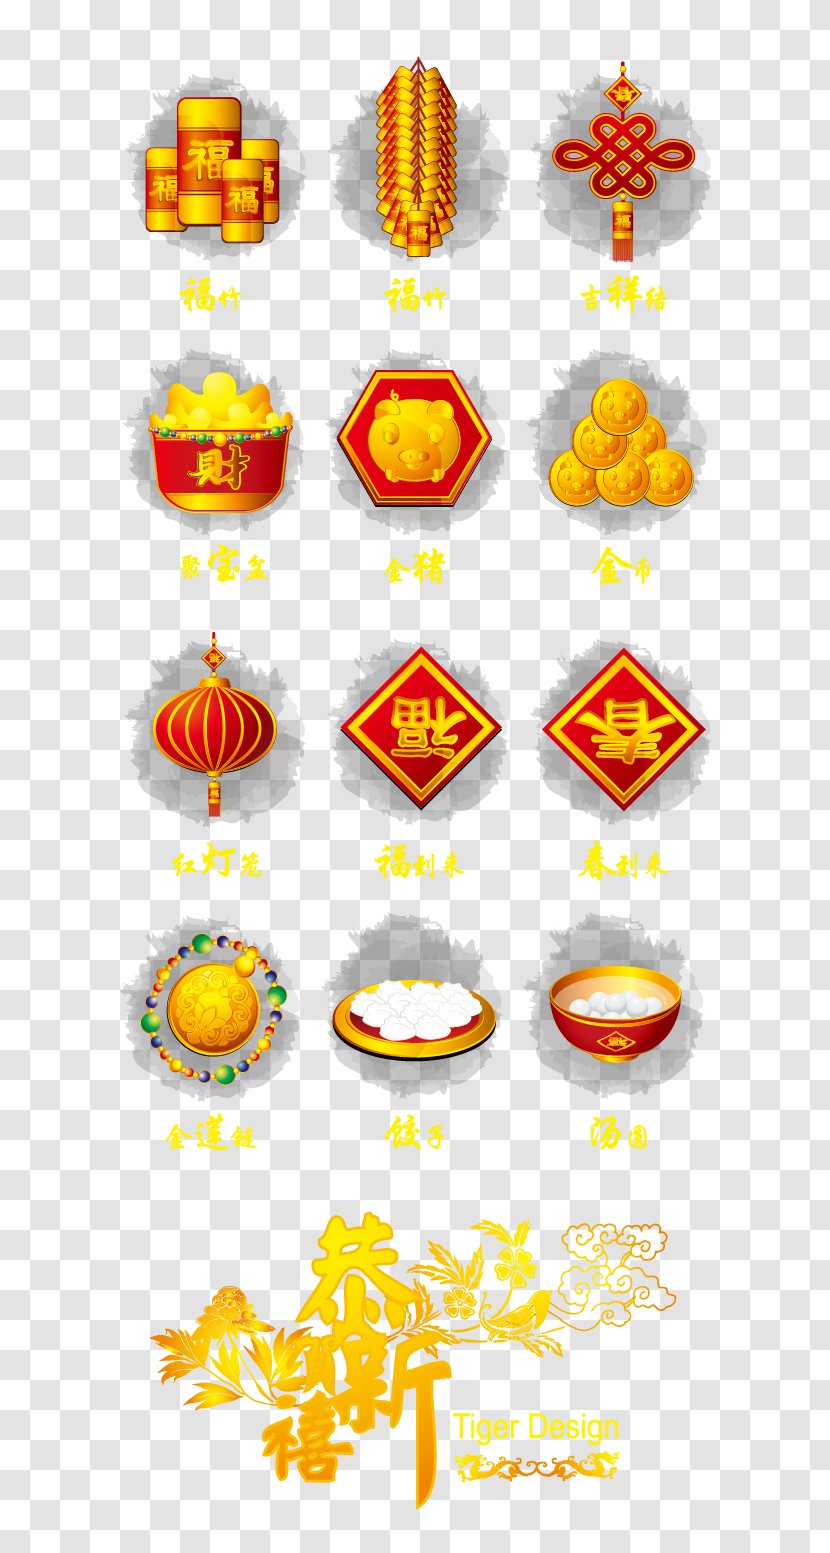 Chinese New Year Adobe Illustrator Clip Art - Yellow - Festive Vector Image Download Transparent PNG